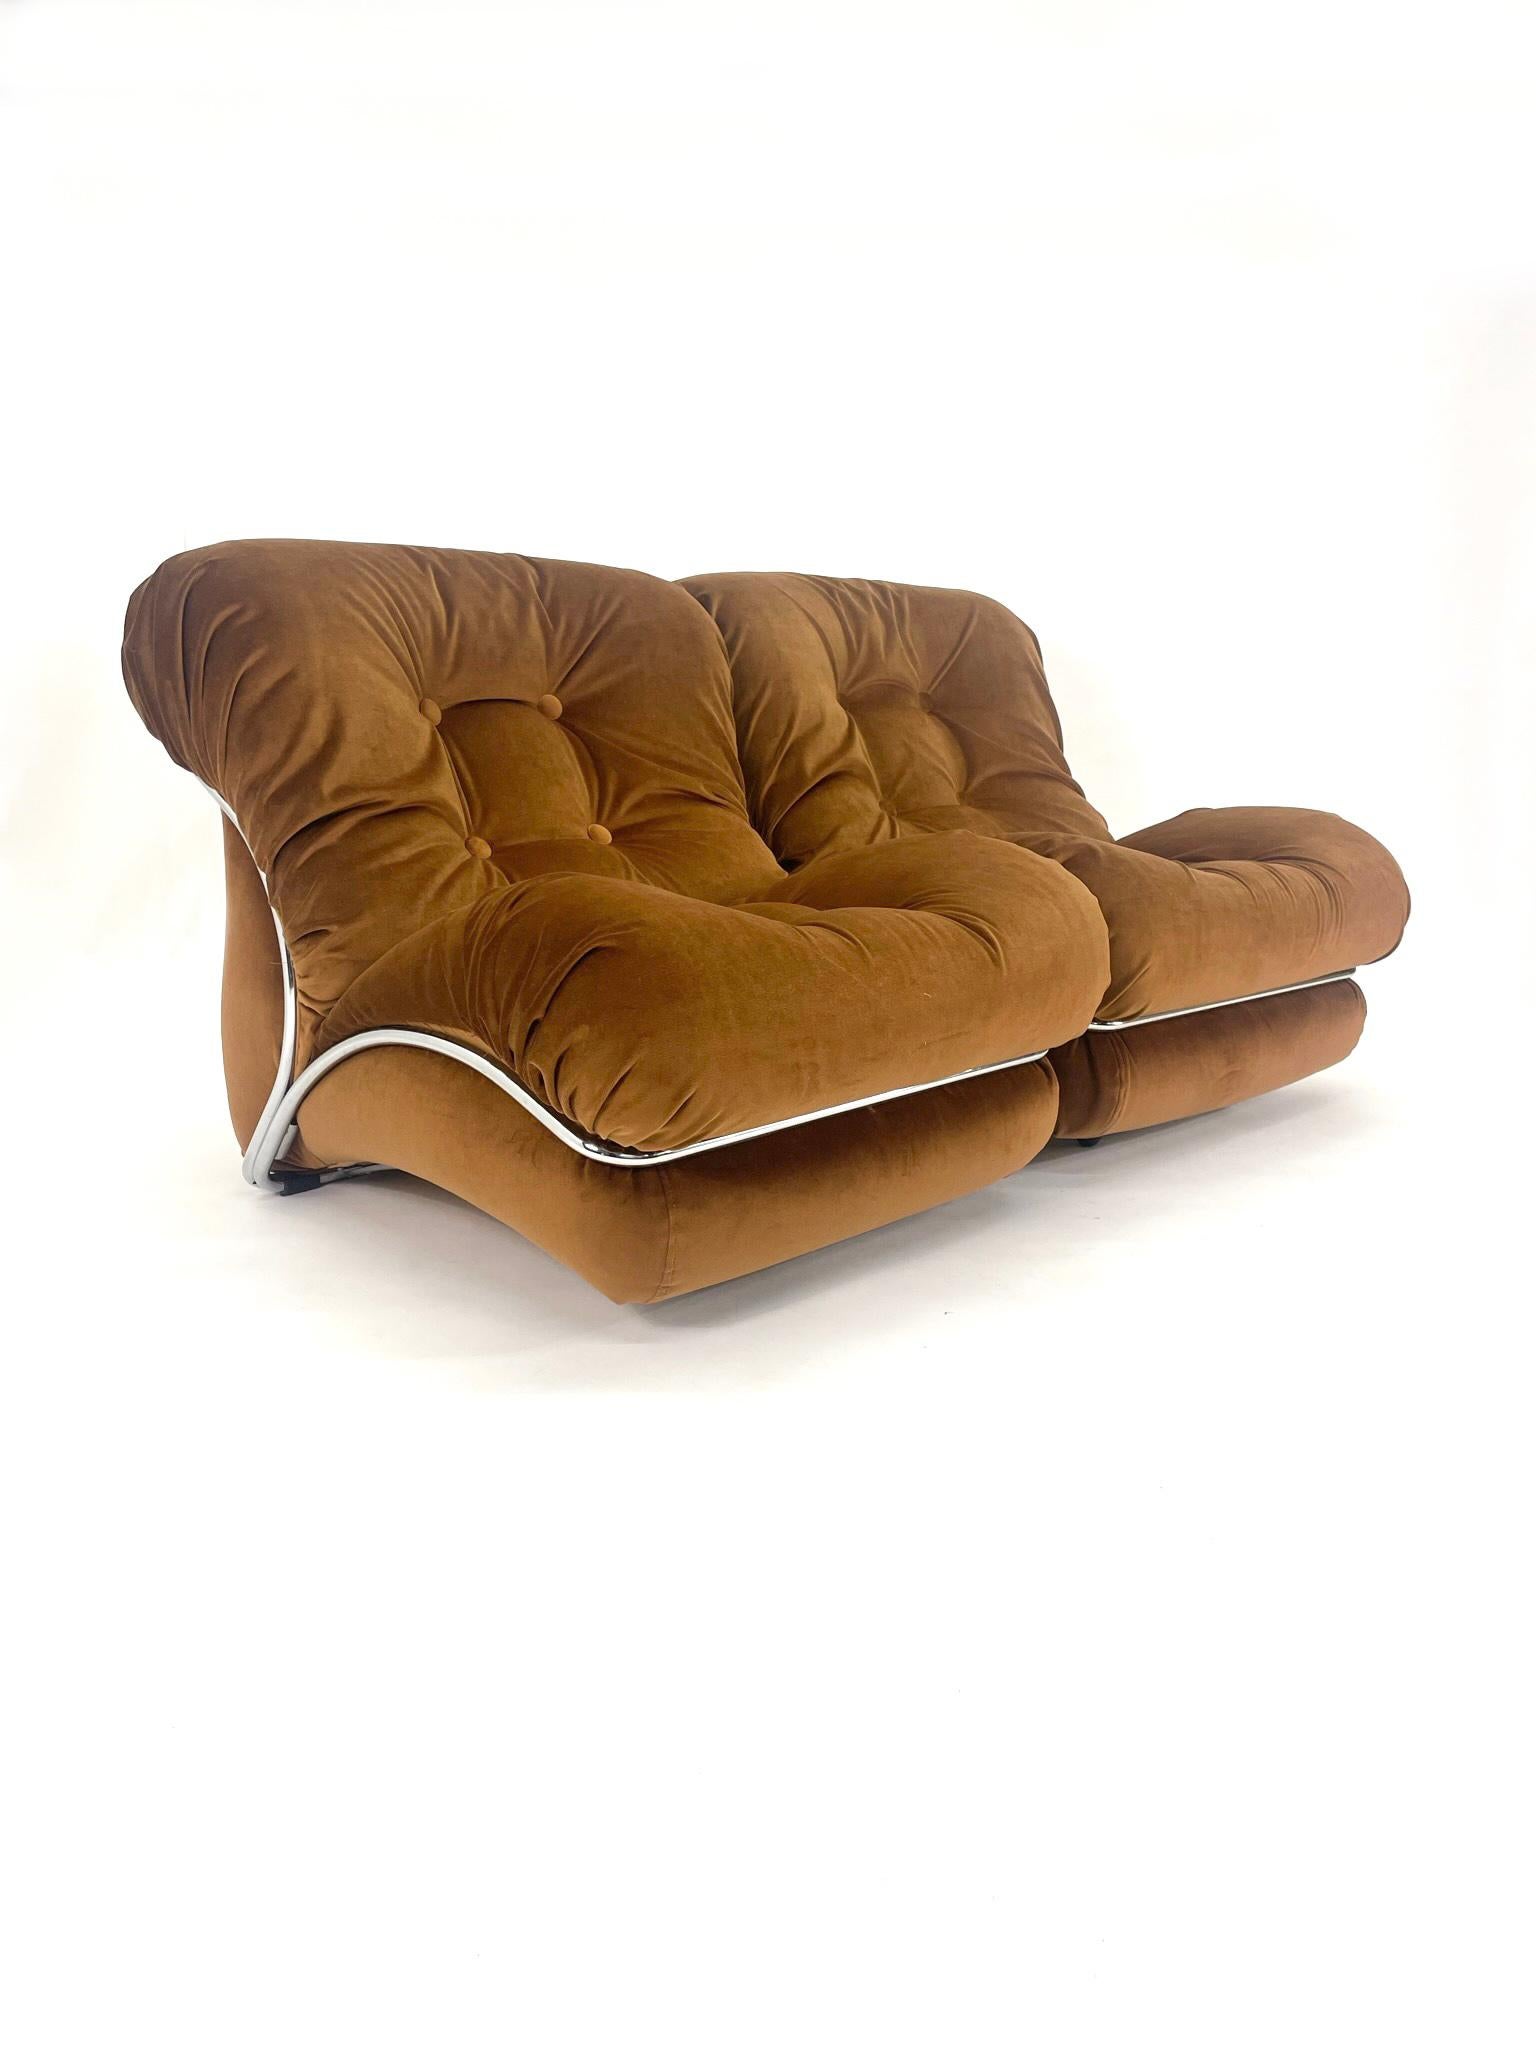 I.P.E. 'Corolla' Lounge Chair (2 available) For Sale 6